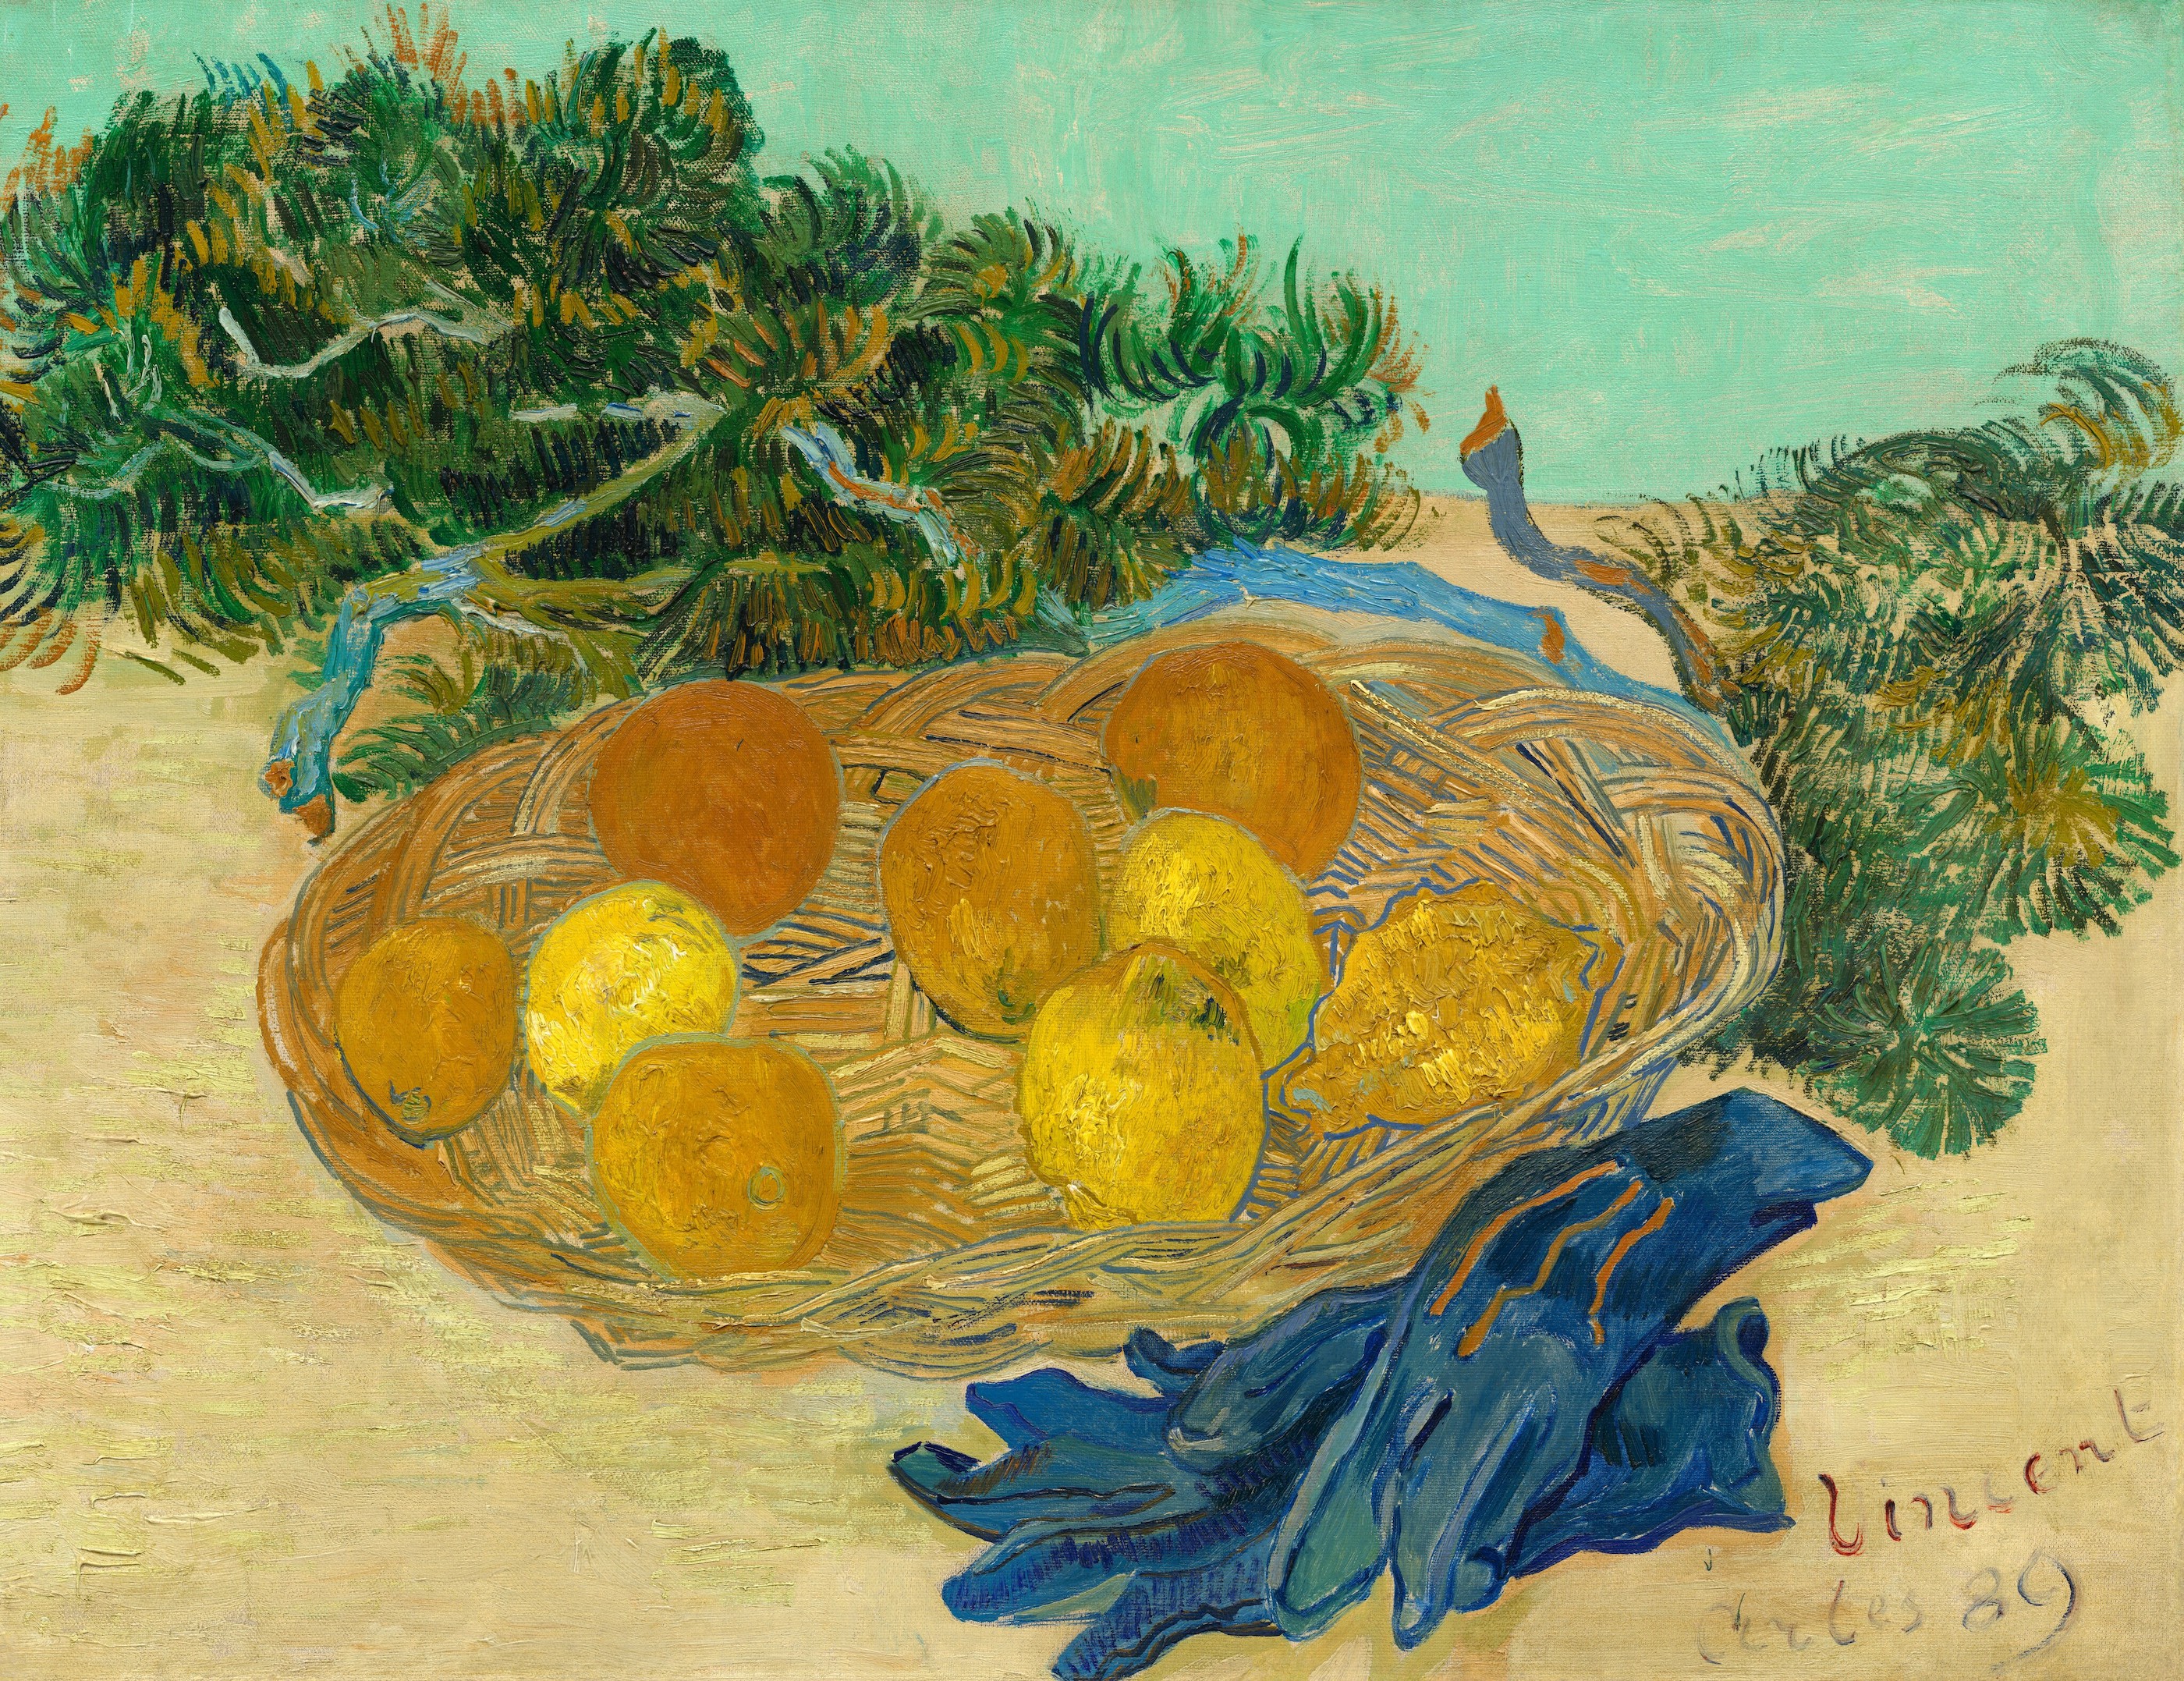 Still Life of Oranges and Lemons with Blue Gloves by Vincent van Gogh - 1889 - 48 × 62 cm National Gallery of Art